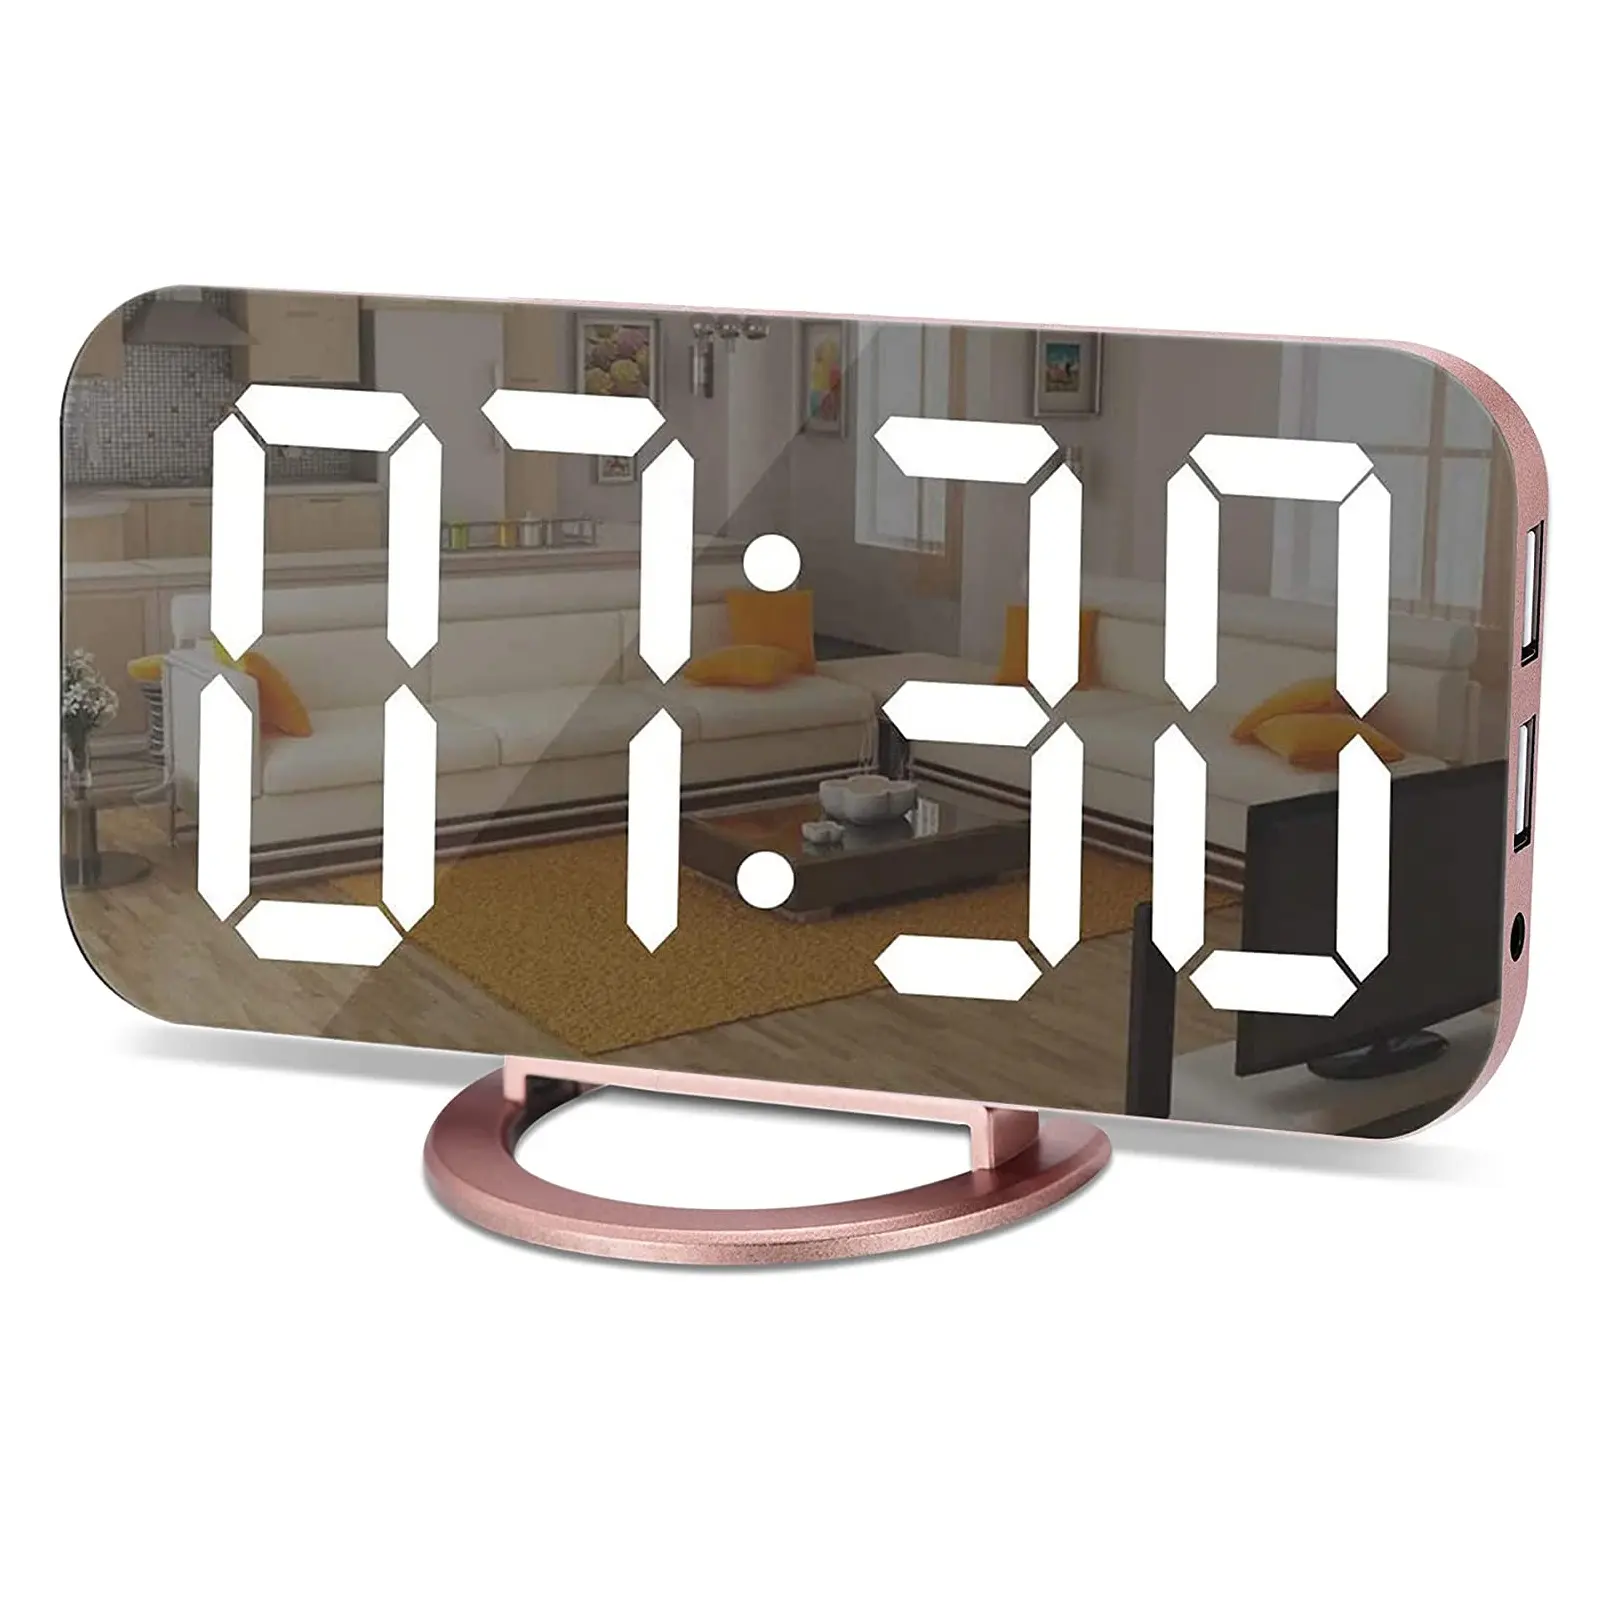 Auto Time Set Alarm Clock With Dual USB Port For Phone Charger , Snooze,Dimmer - Digital LED Clock With Battery Backup